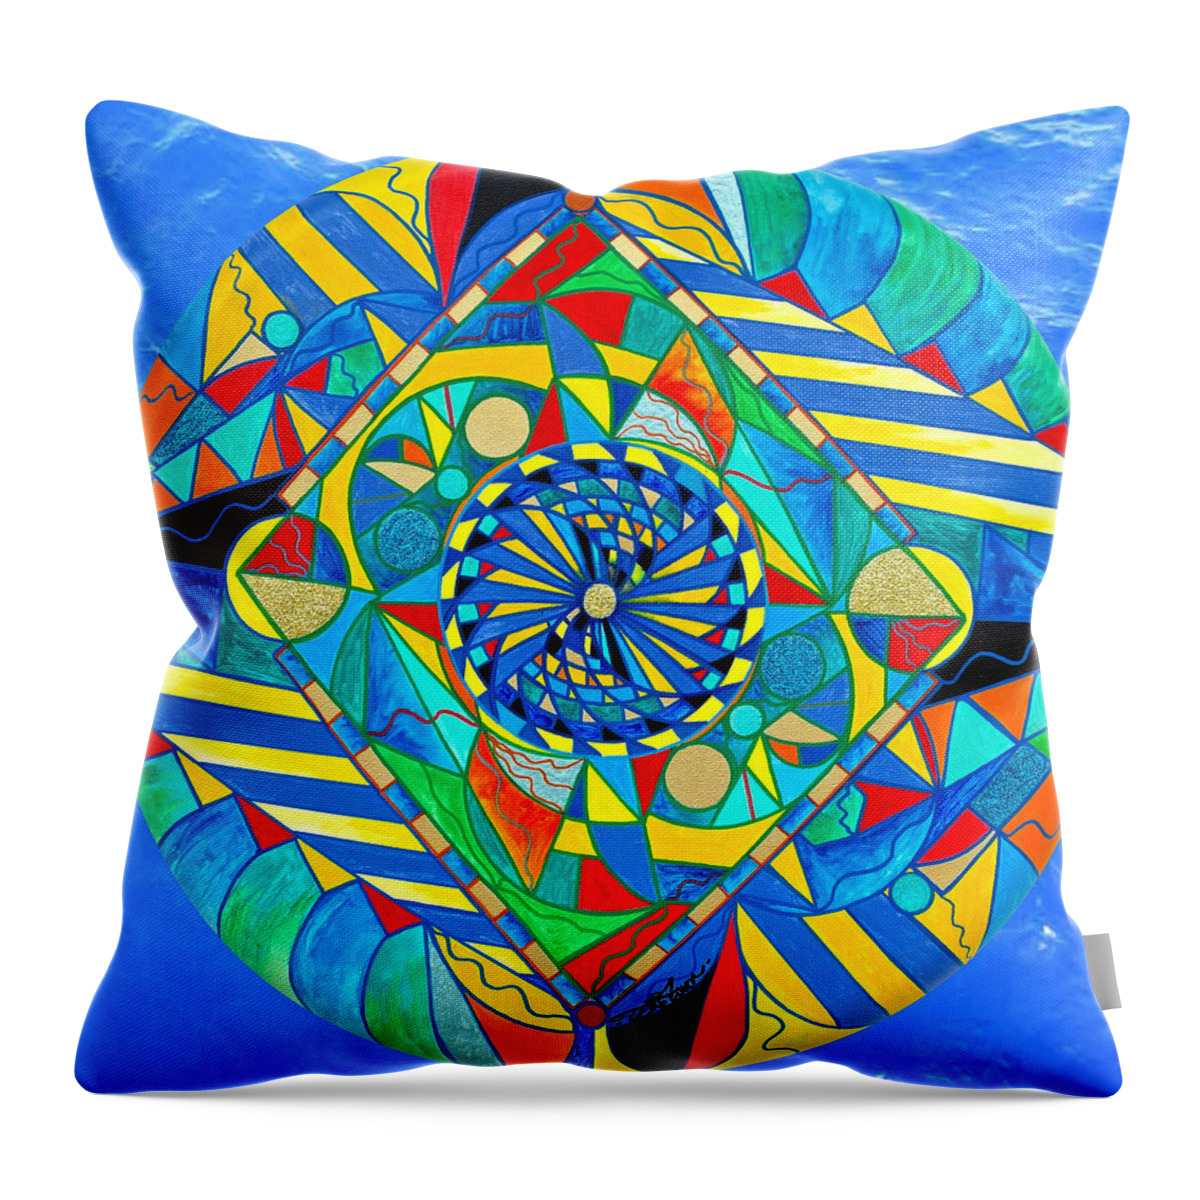 Vibration Throw Pillow featuring the painting Ascended Reunion by Teal Eye Print Store